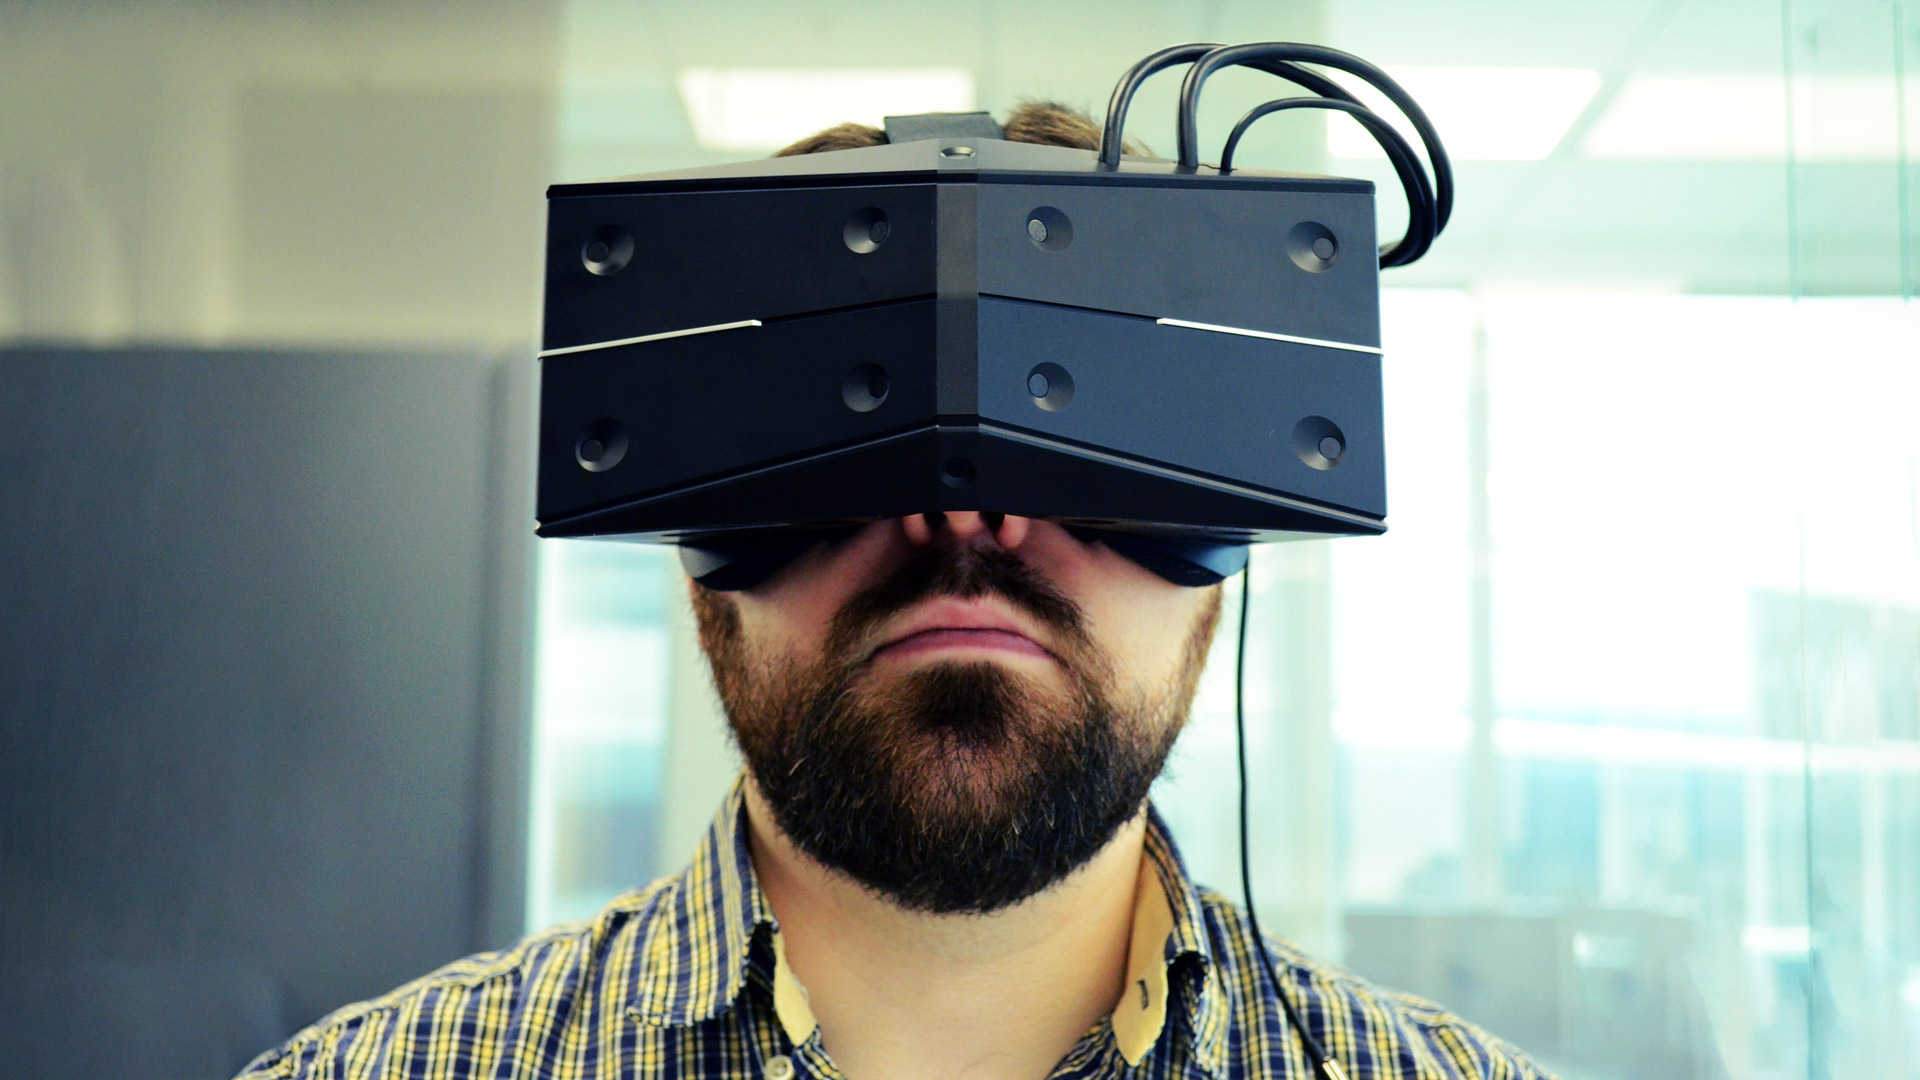 One is Most Complete Ultra-wide VR Headset to Date